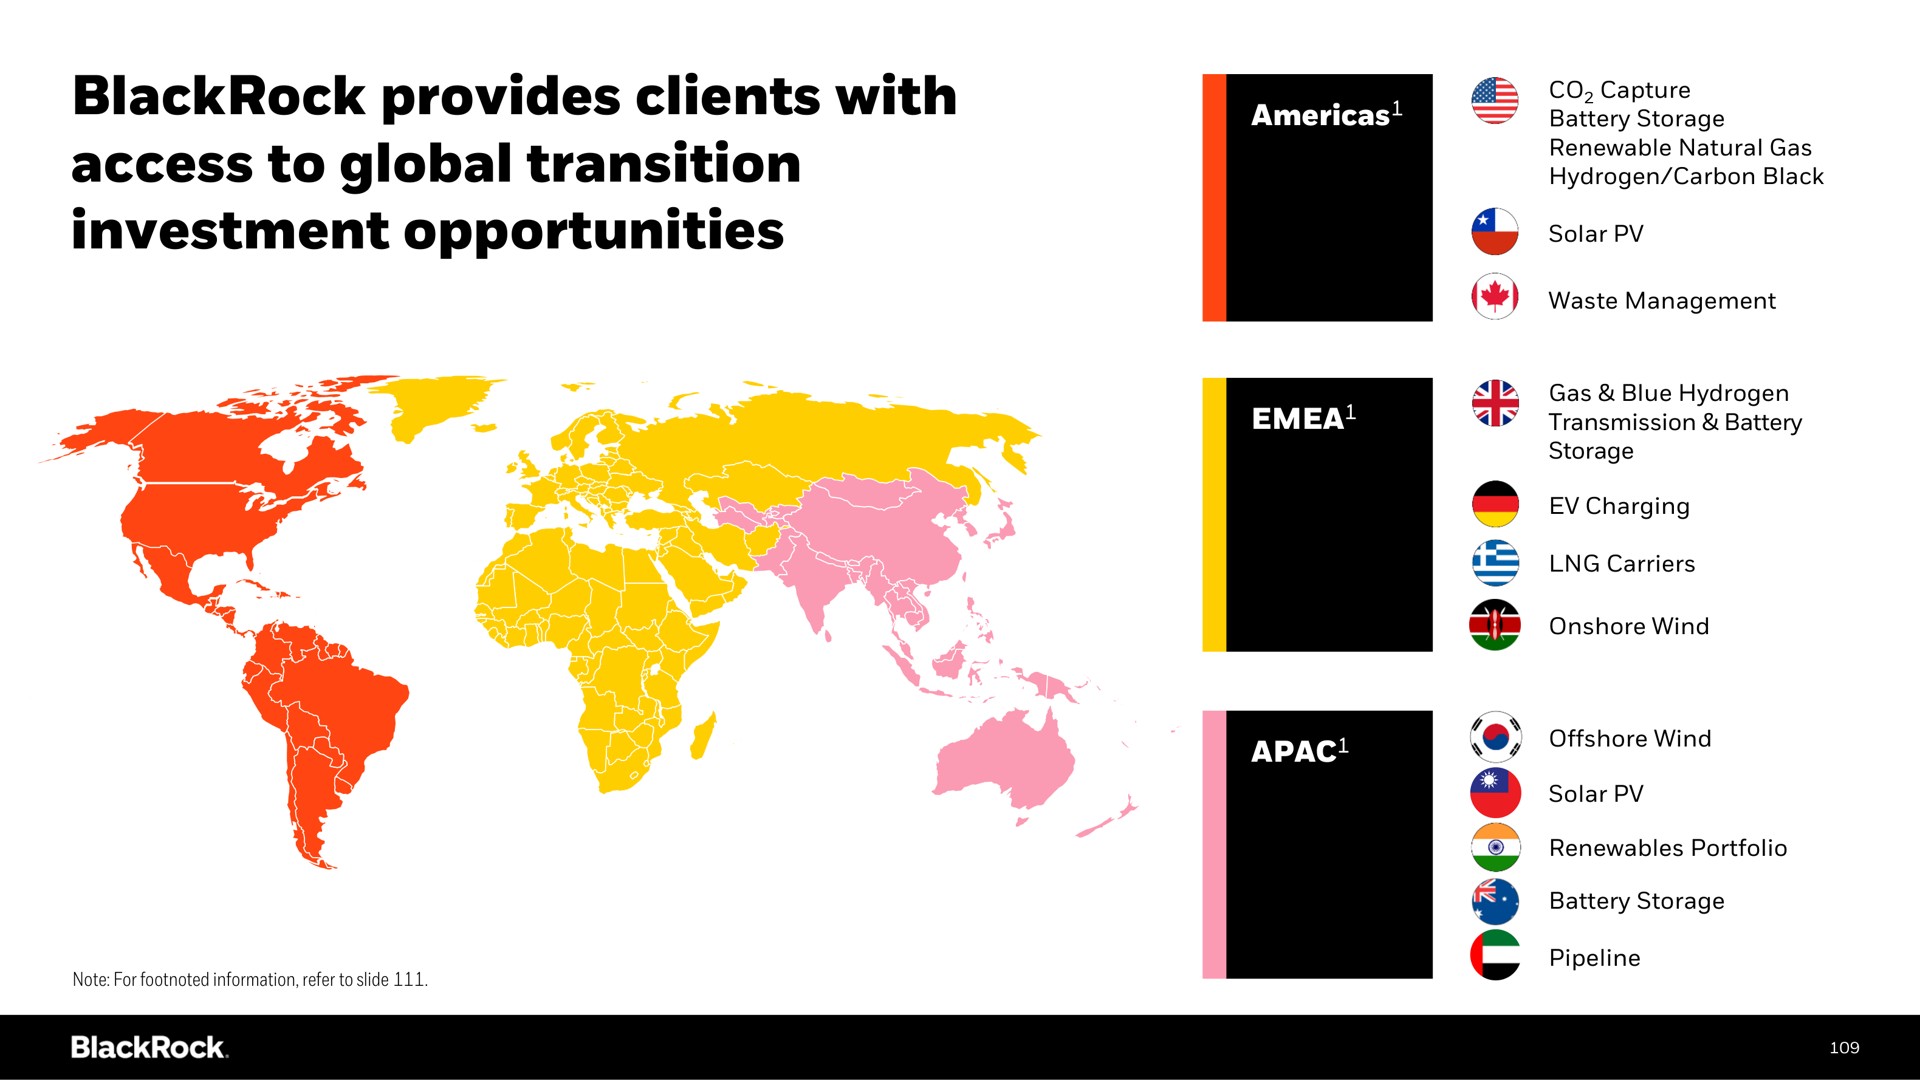 provides clients with access to global transition investment opportunities | BlackRock